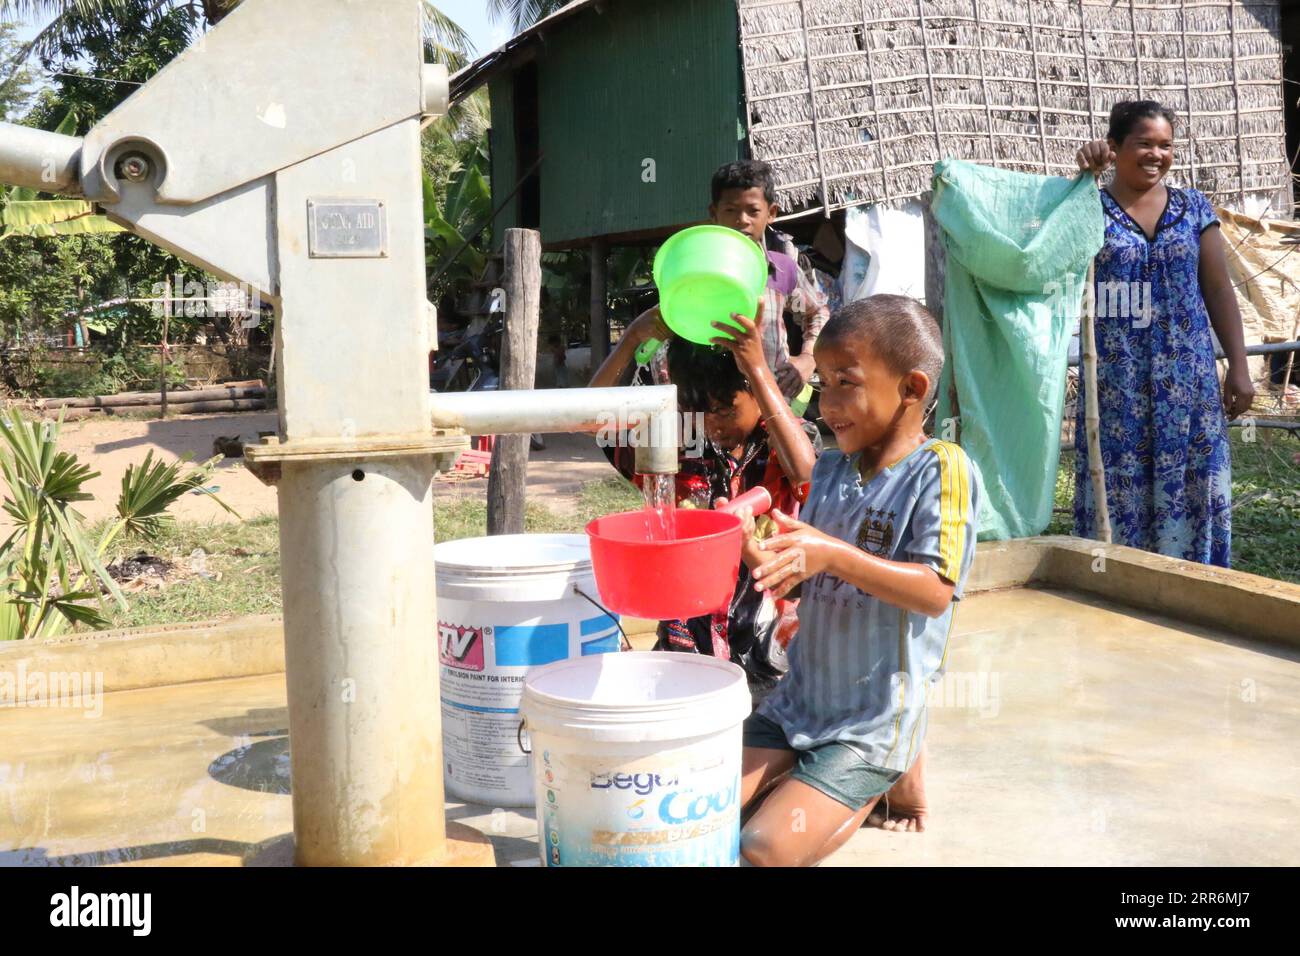 210222 -- KAMPONG SPEU, Feb. 22, 2021 -- Children fetch water from a new well constructed under the Phase II of China-aided rural water supply and rural road projects in Cambodia in Kampong Speu Province of Cambodia, Jan. 15, 2021. TO GO WITH Interview: China-aided rural projects playing vital role in improving Cambodia s economy, people s livelihoods: Cambodian official  CAMBODIA-KAMPONG SPEU-CHINA-AID ZhangxZhao PUBLICATIONxNOTxINxCHN Stock Photo